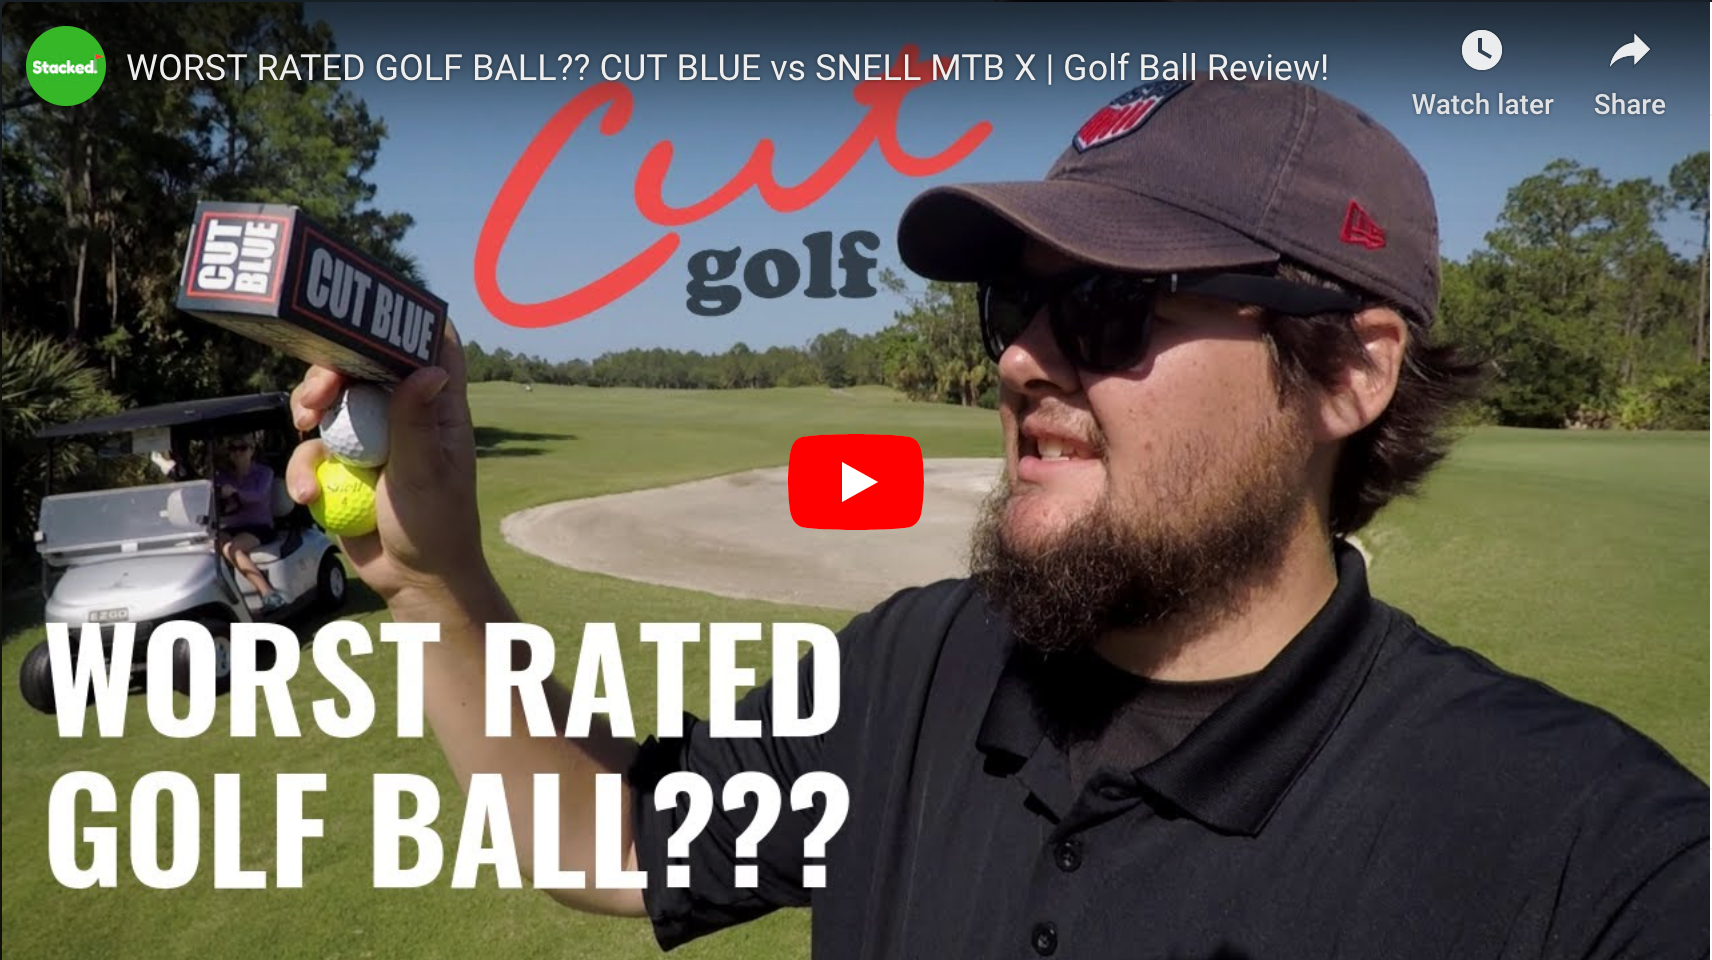 Stacked Golf Review of Cut Blue